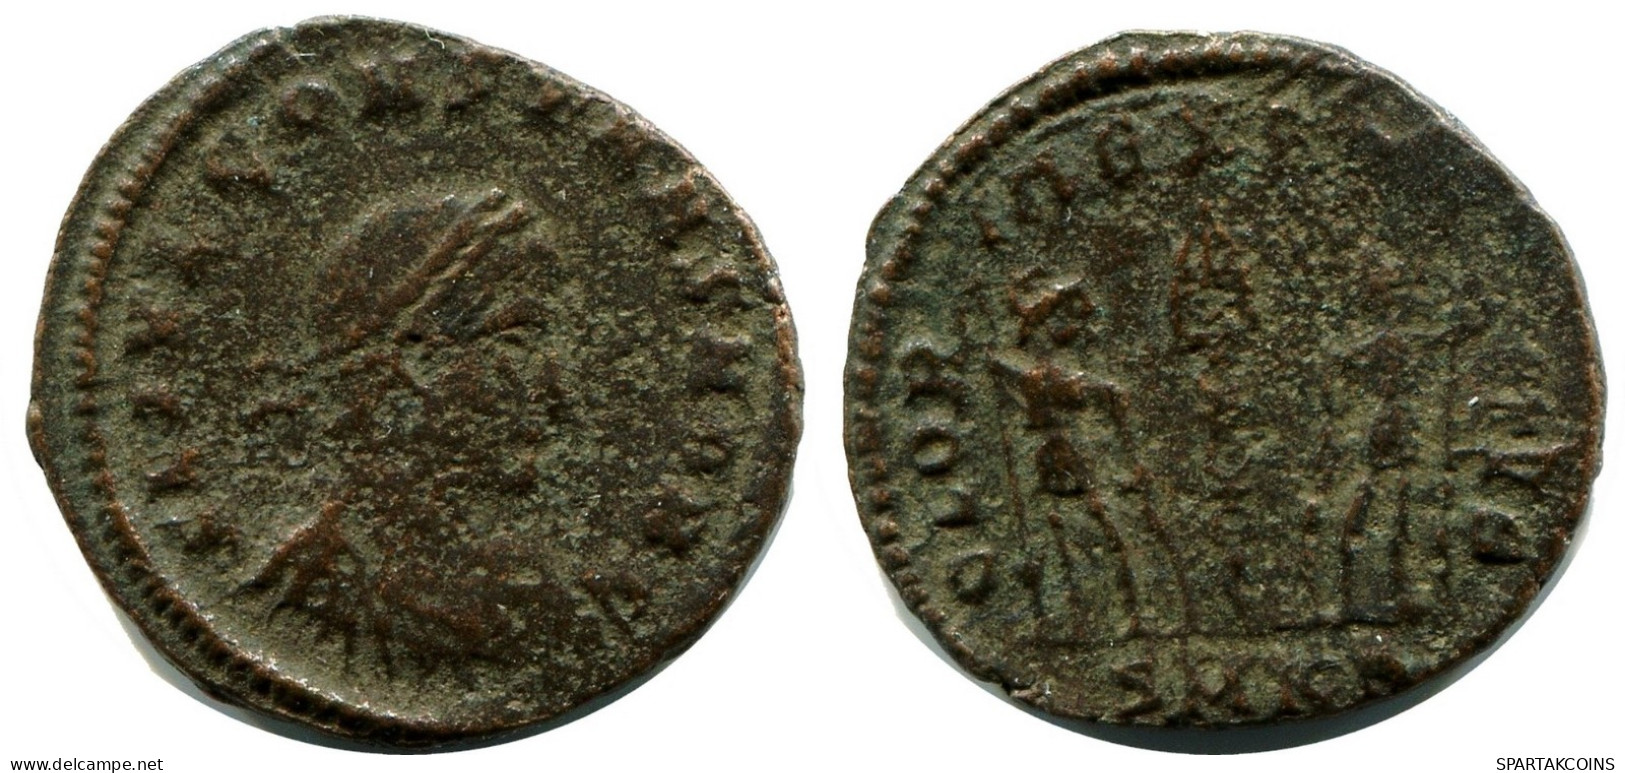 CONSTANS MINTED IN CYZICUS FROM THE ROYAL ONTARIO MUSEUM #ANC11602.14.D.A - Der Christlischen Kaiser (307 / 363)